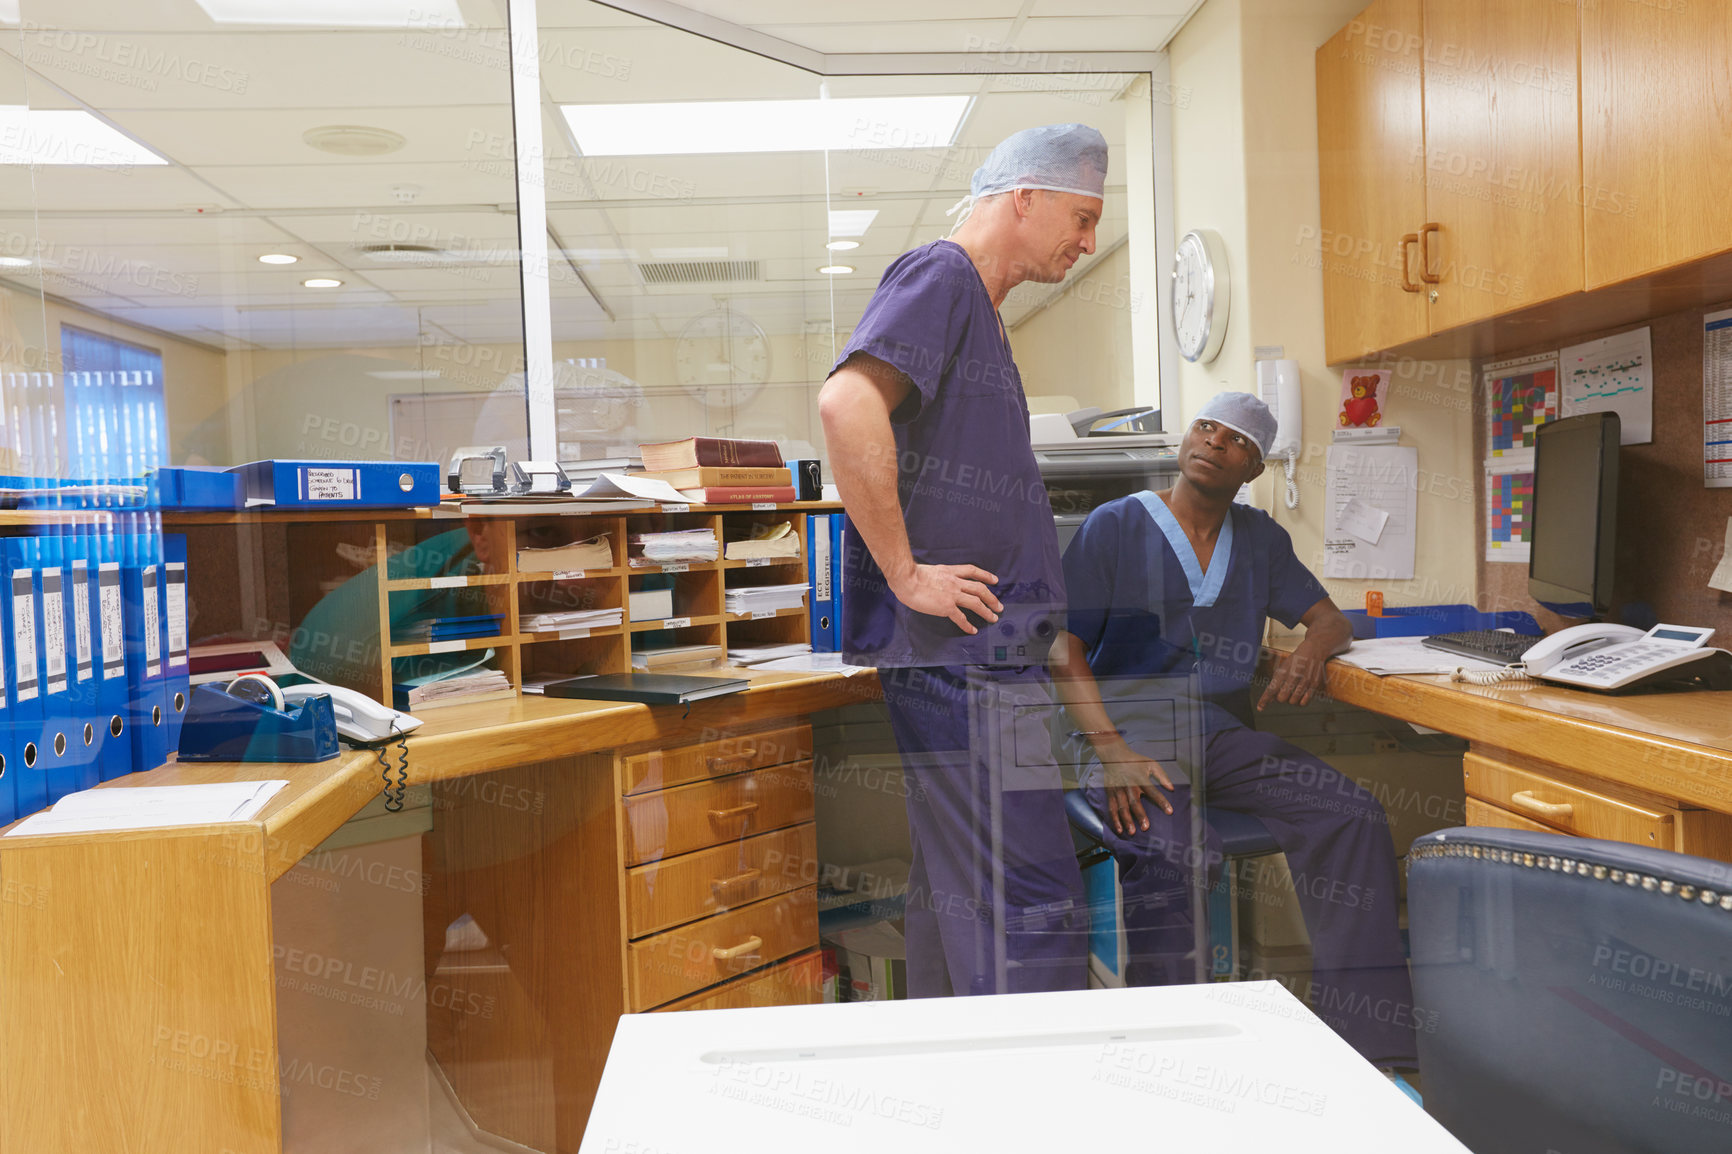 Buy stock photo Shot of two surgeons having a discussion in a hospital